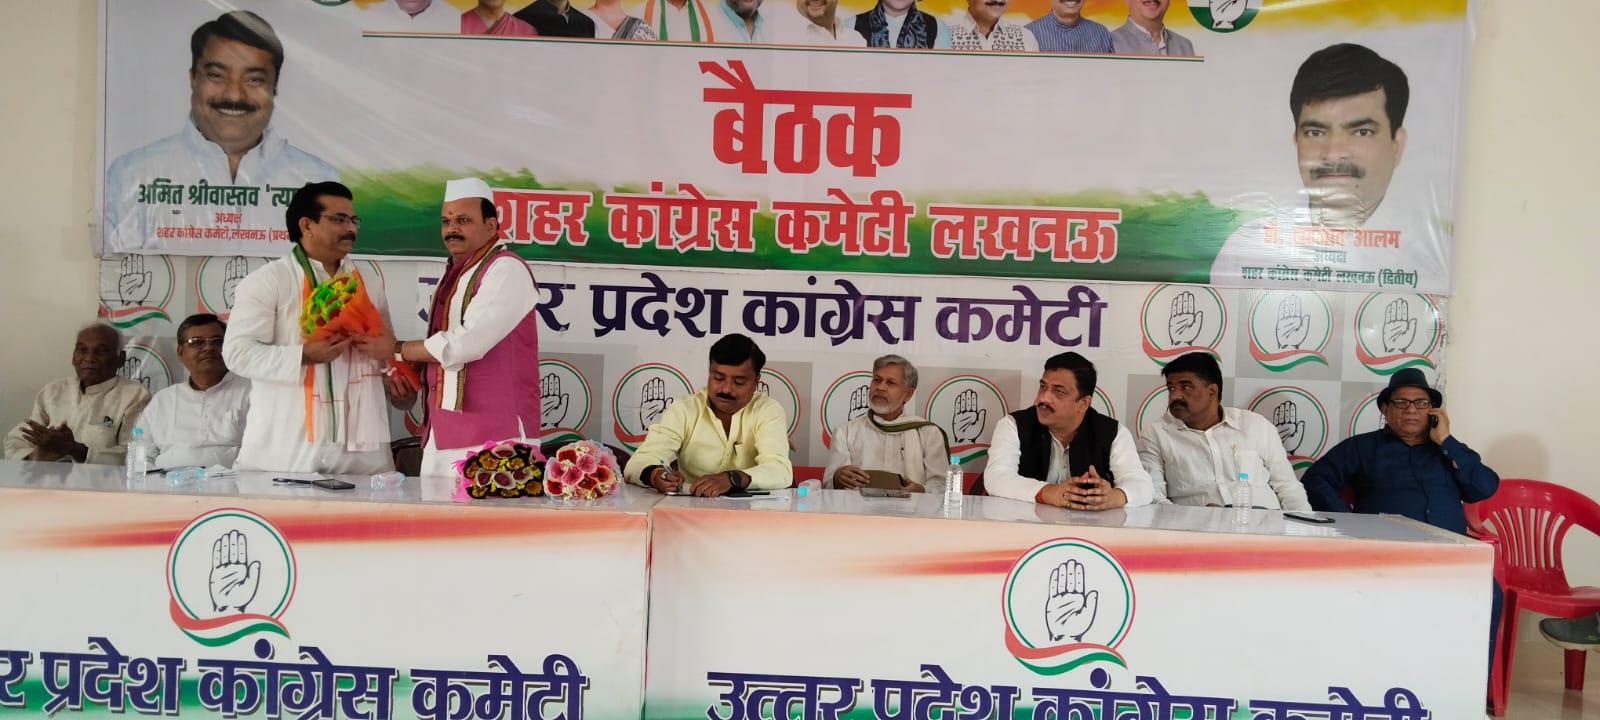 We have to reach the ground and deliver the 5 Nyayas and 25 guarantees of the Congress Party's Nyaya Patra to every home across the state: Aradhana Mishra Mona.